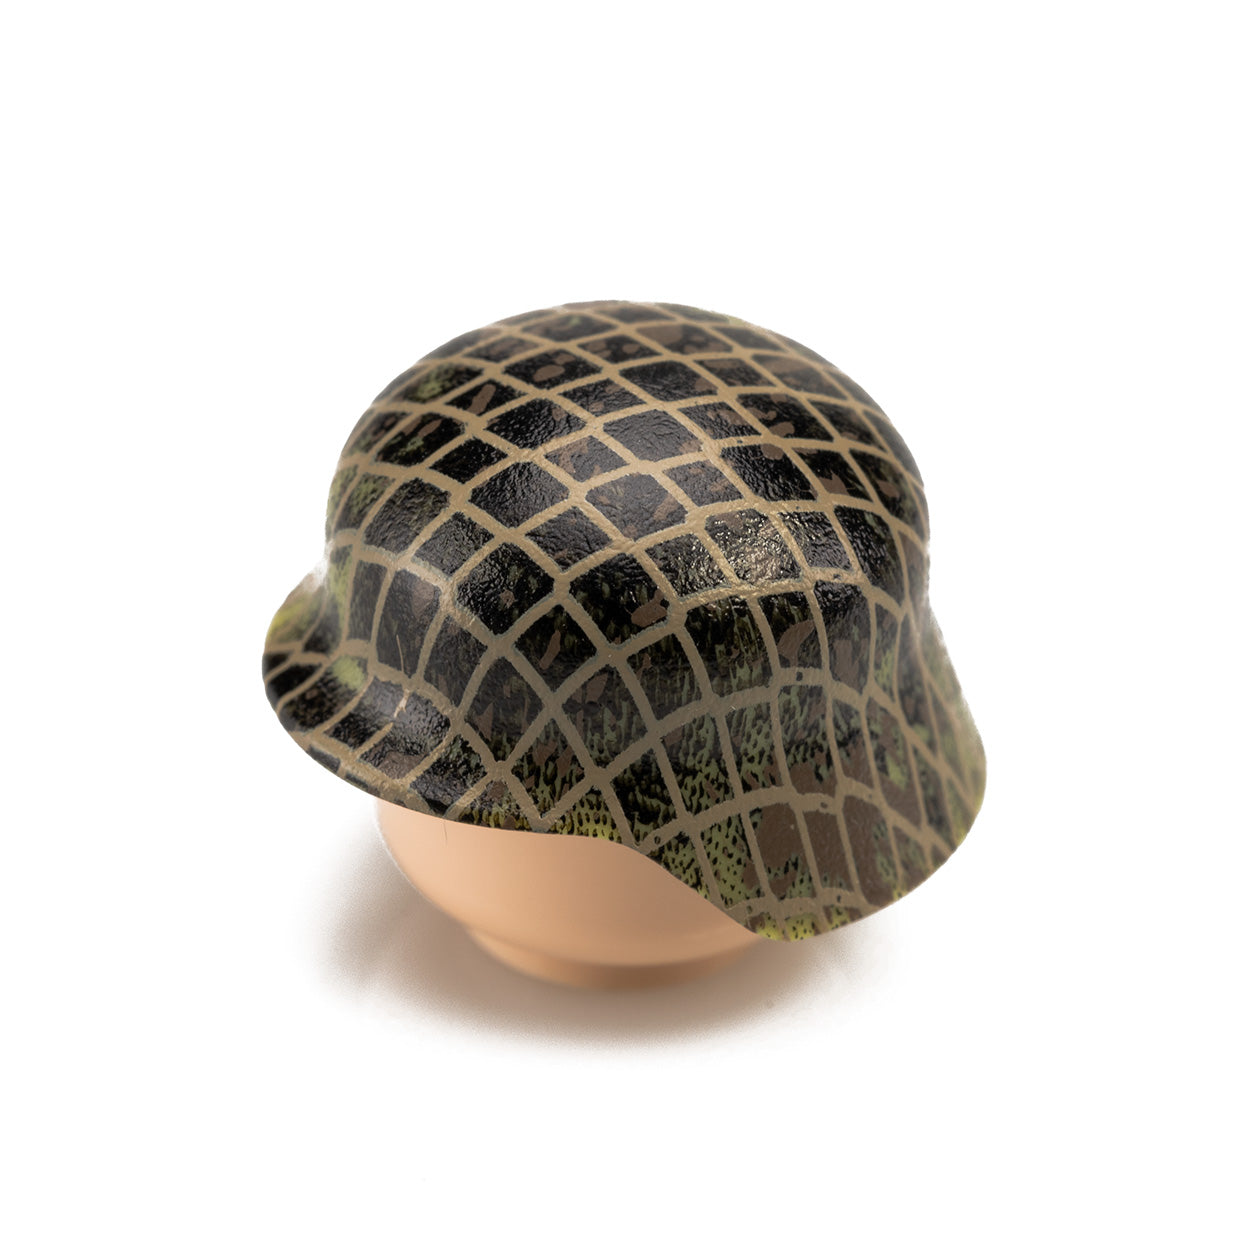 Custom Printed Lego - Grime/Netted Stahlhelm (Olive) - The Minifig Co.